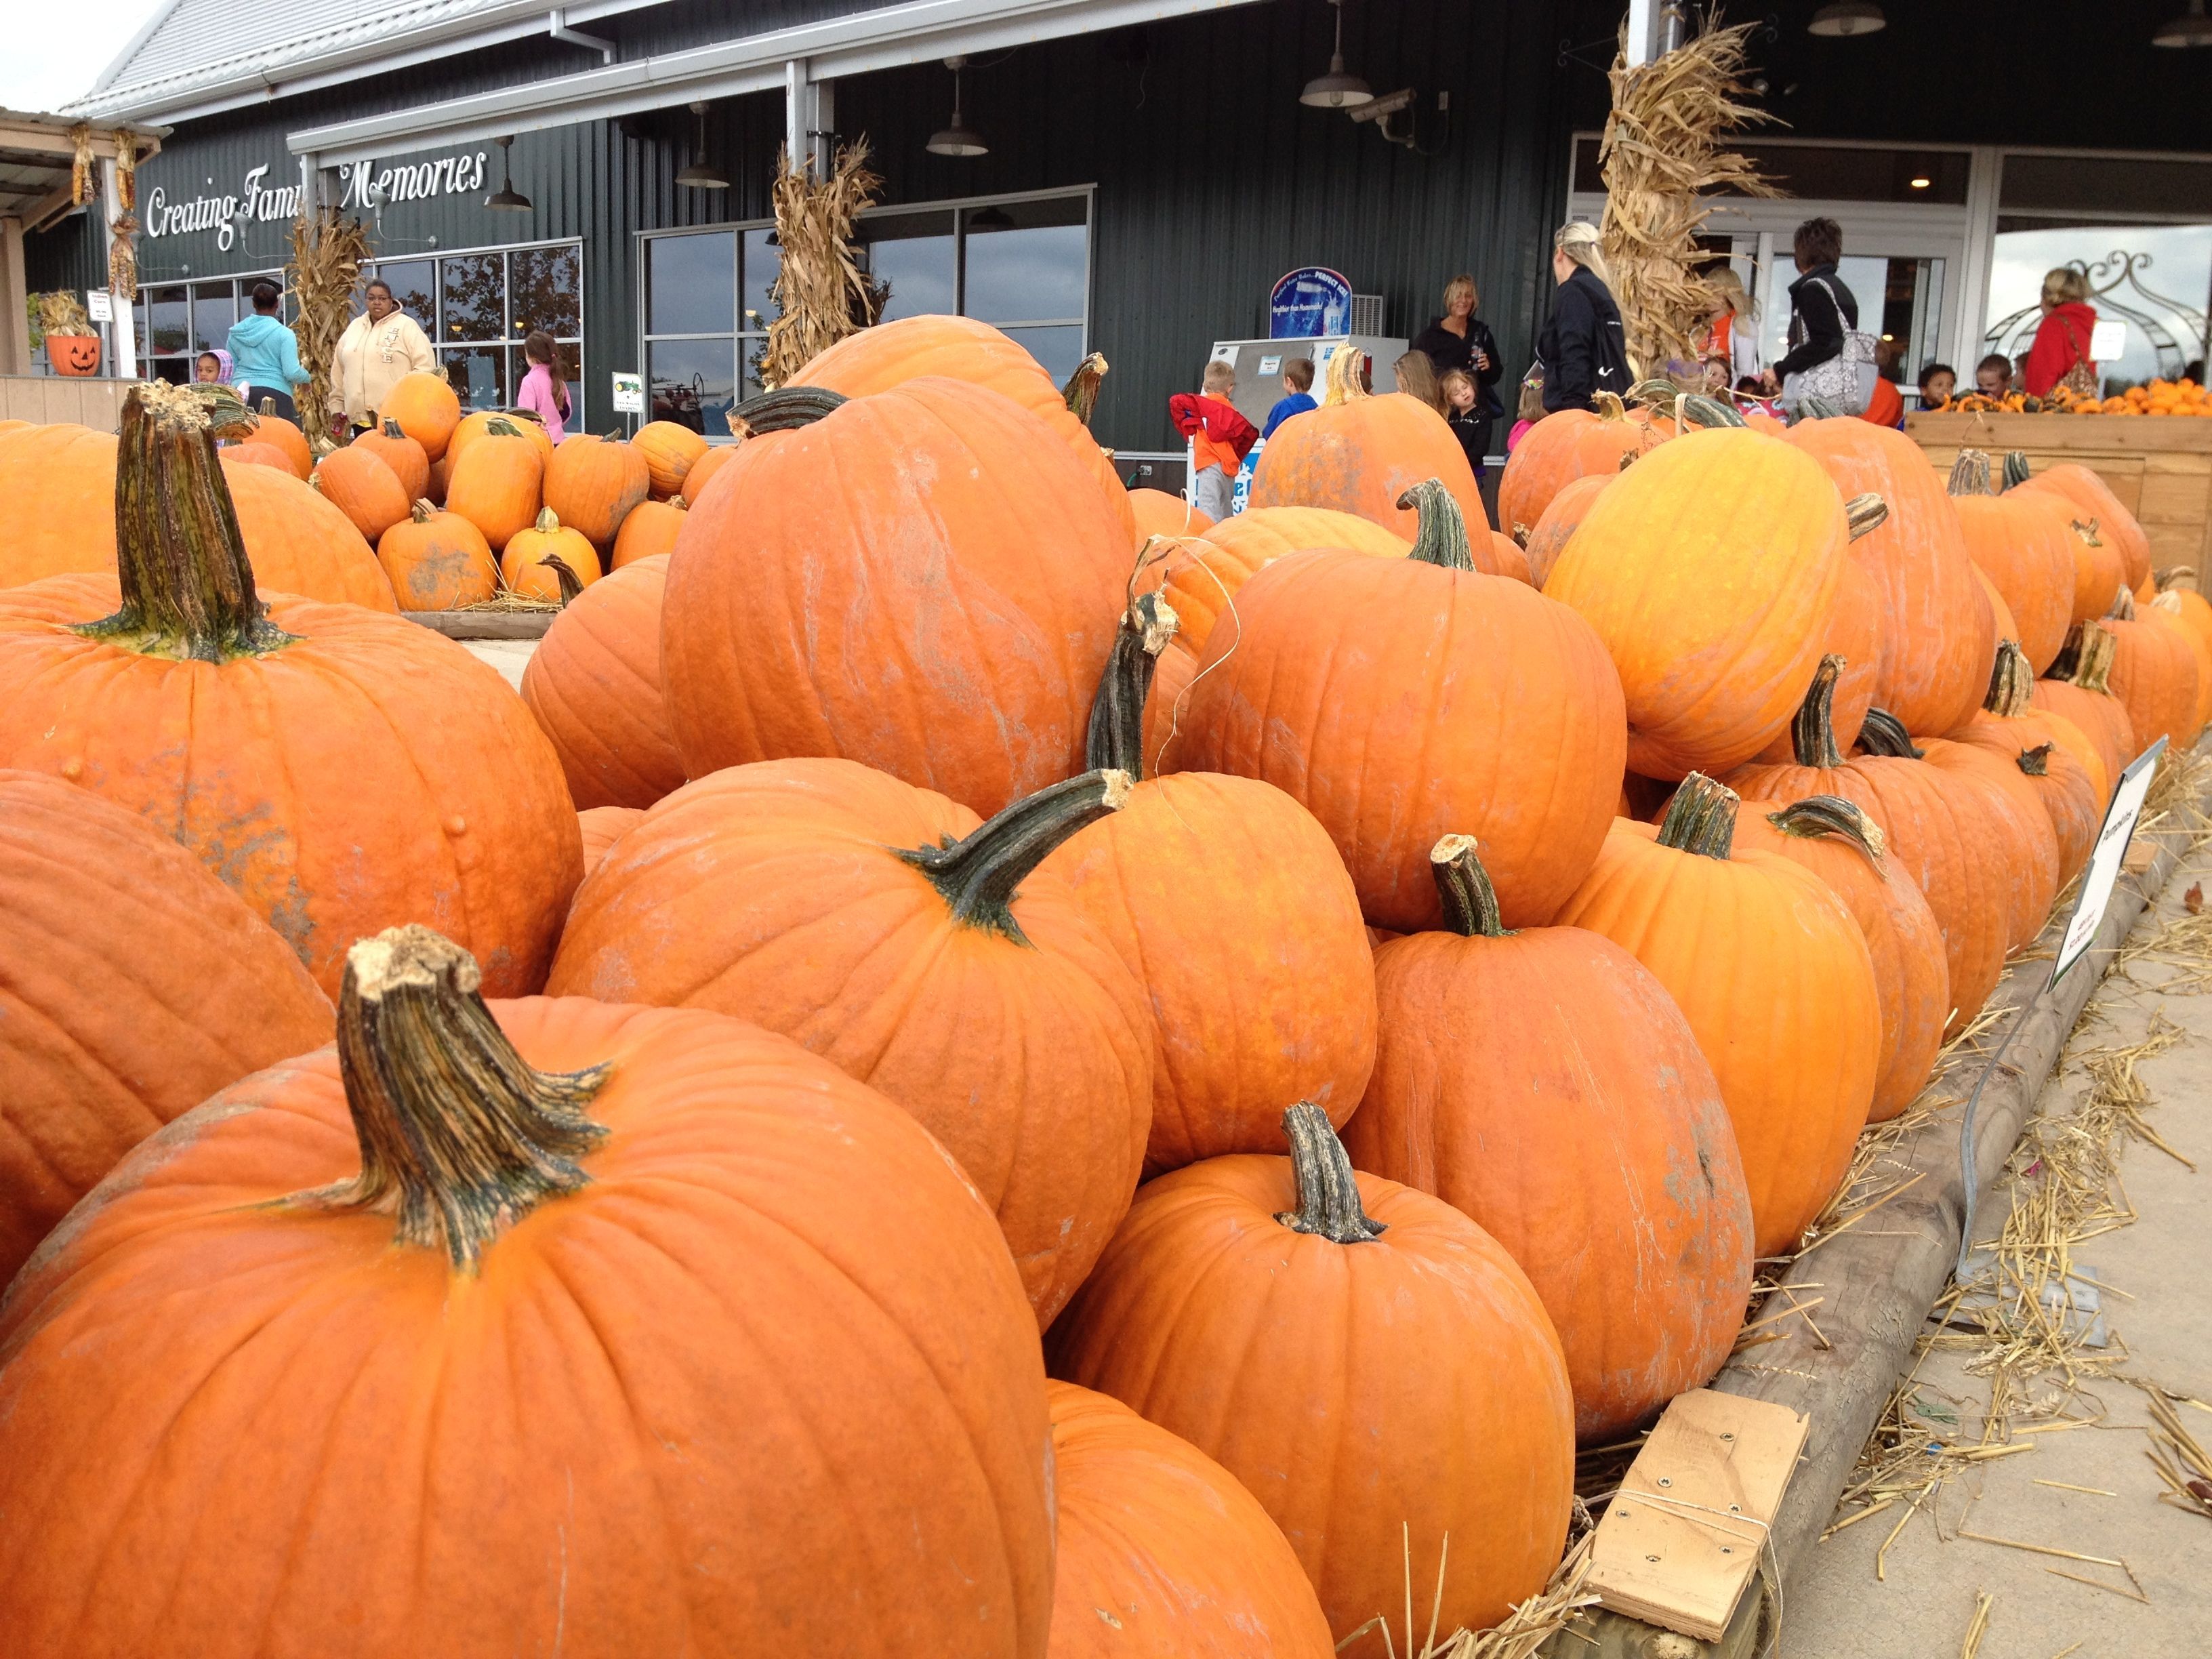 The Best Fall Festivals in St. Louis